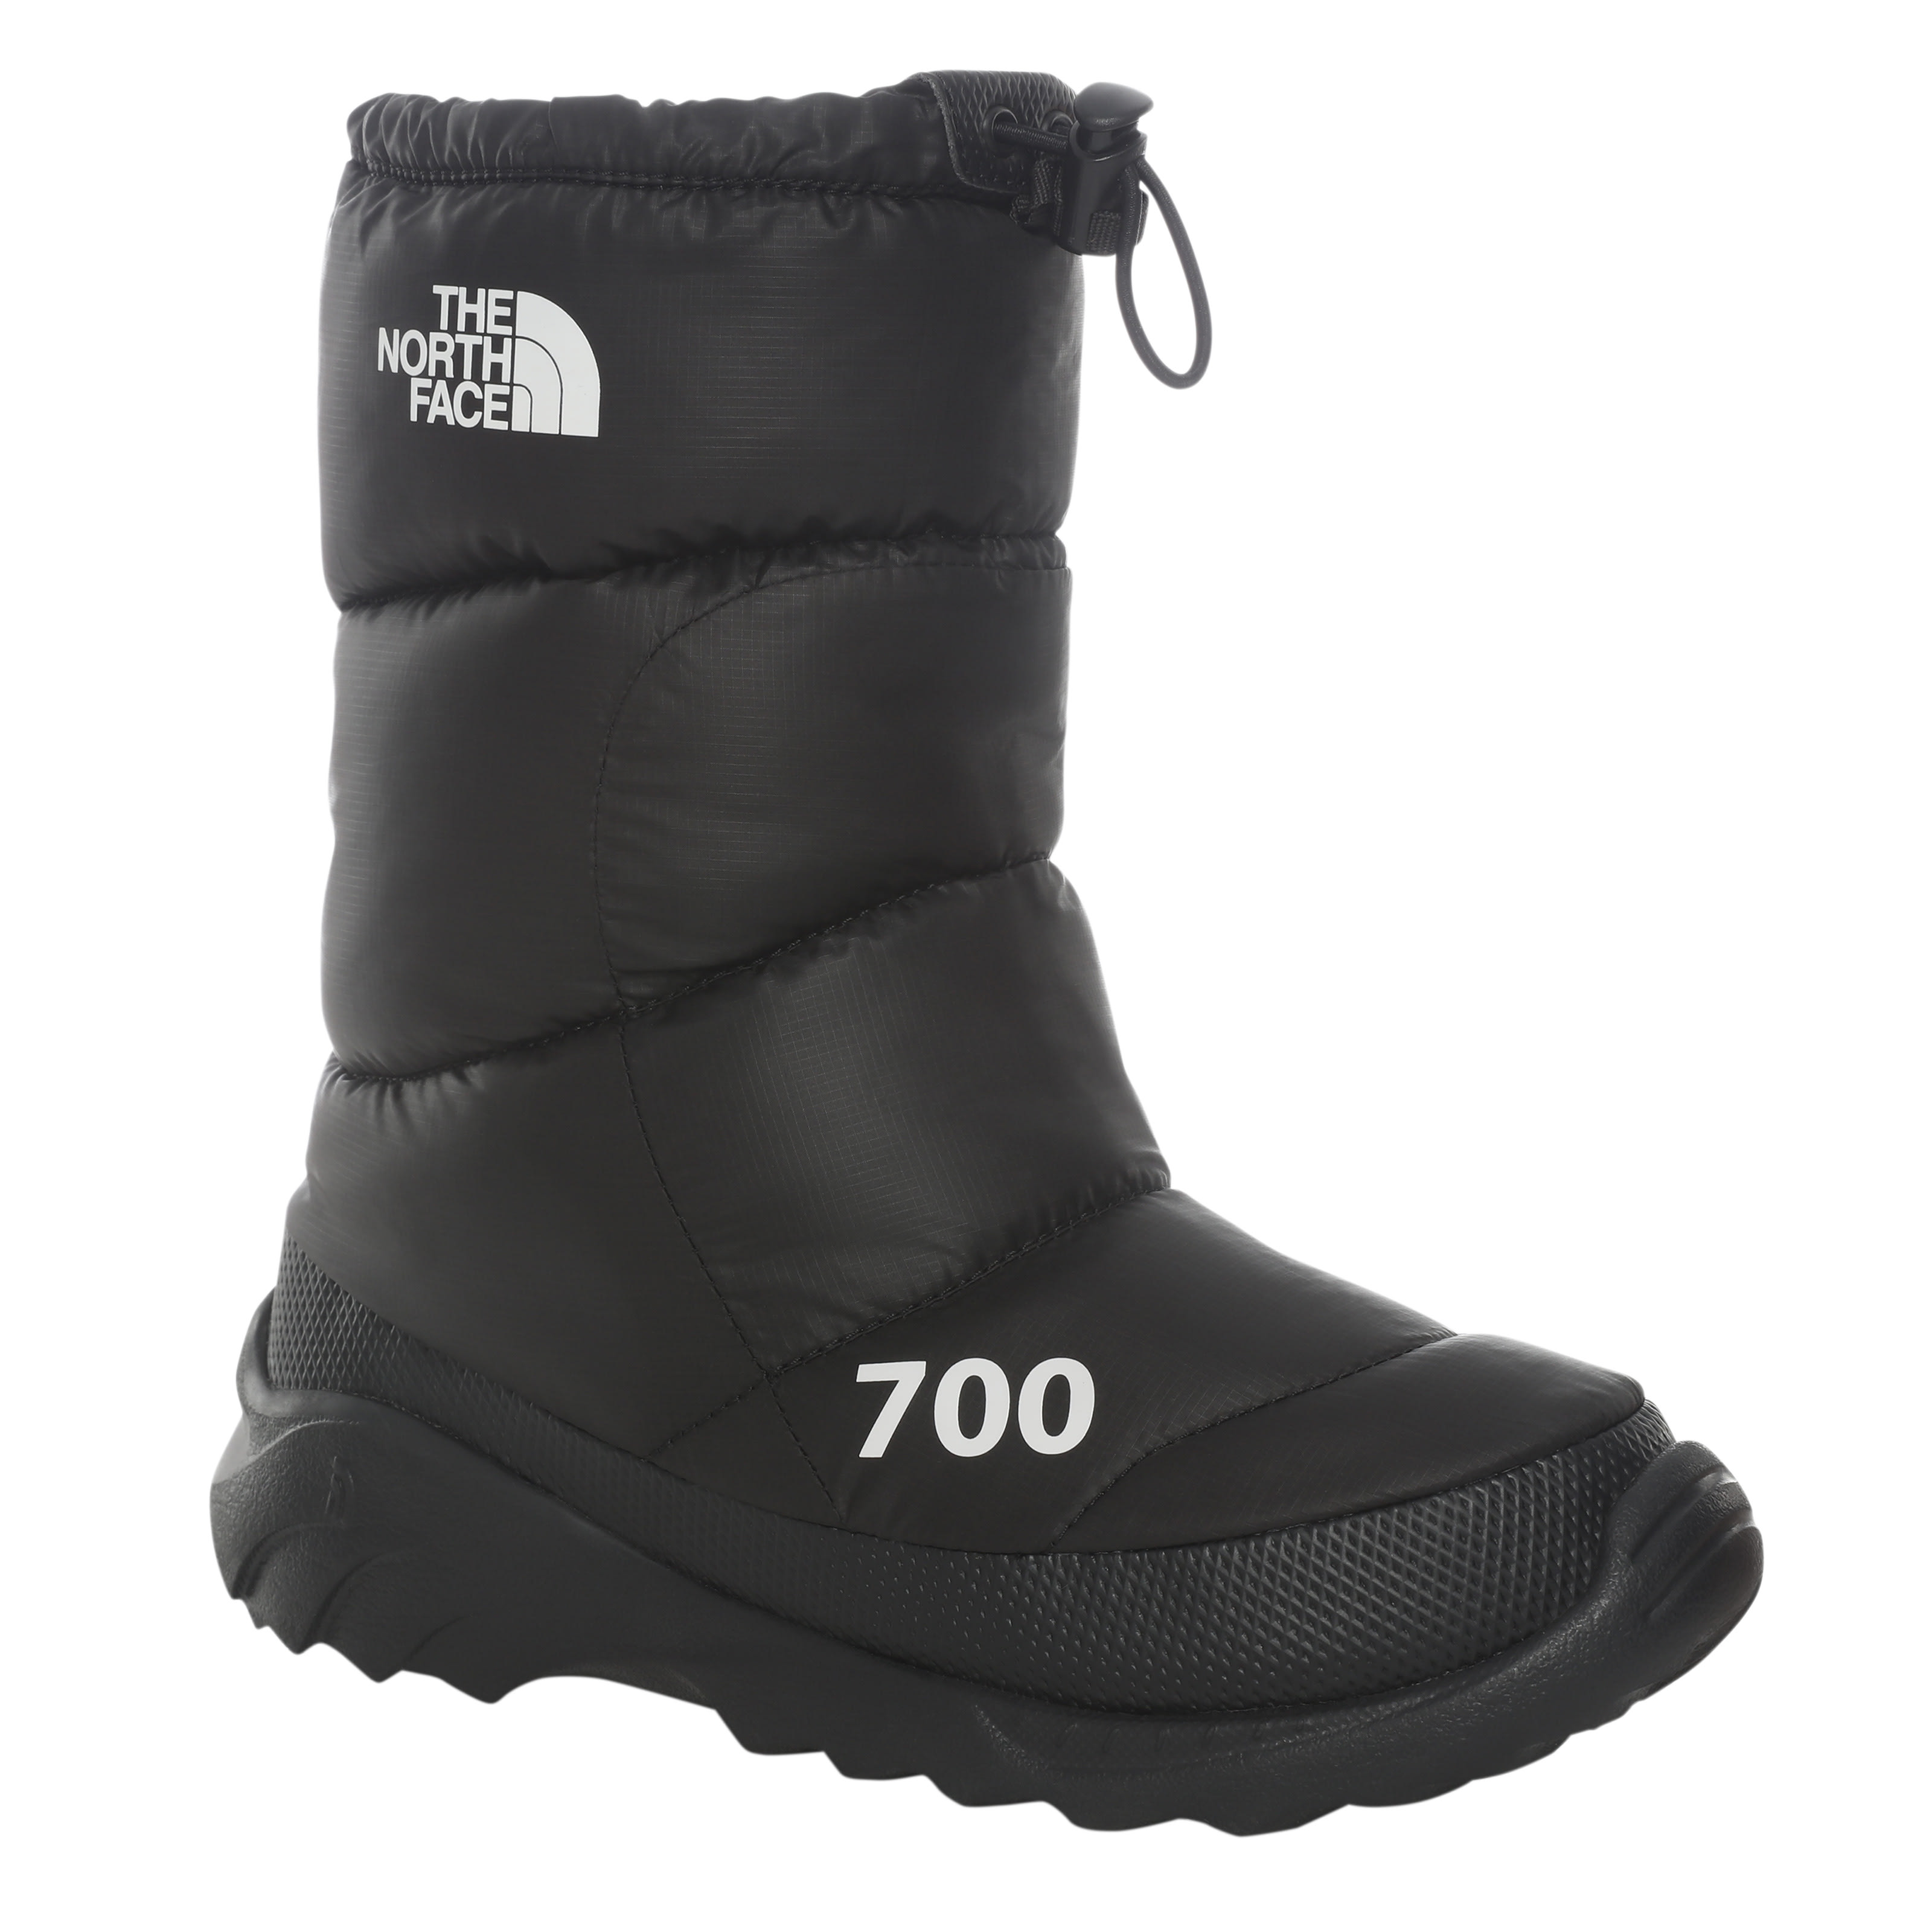 Buy The North Face Women's Nuptse Bootie 700 from Outnorth